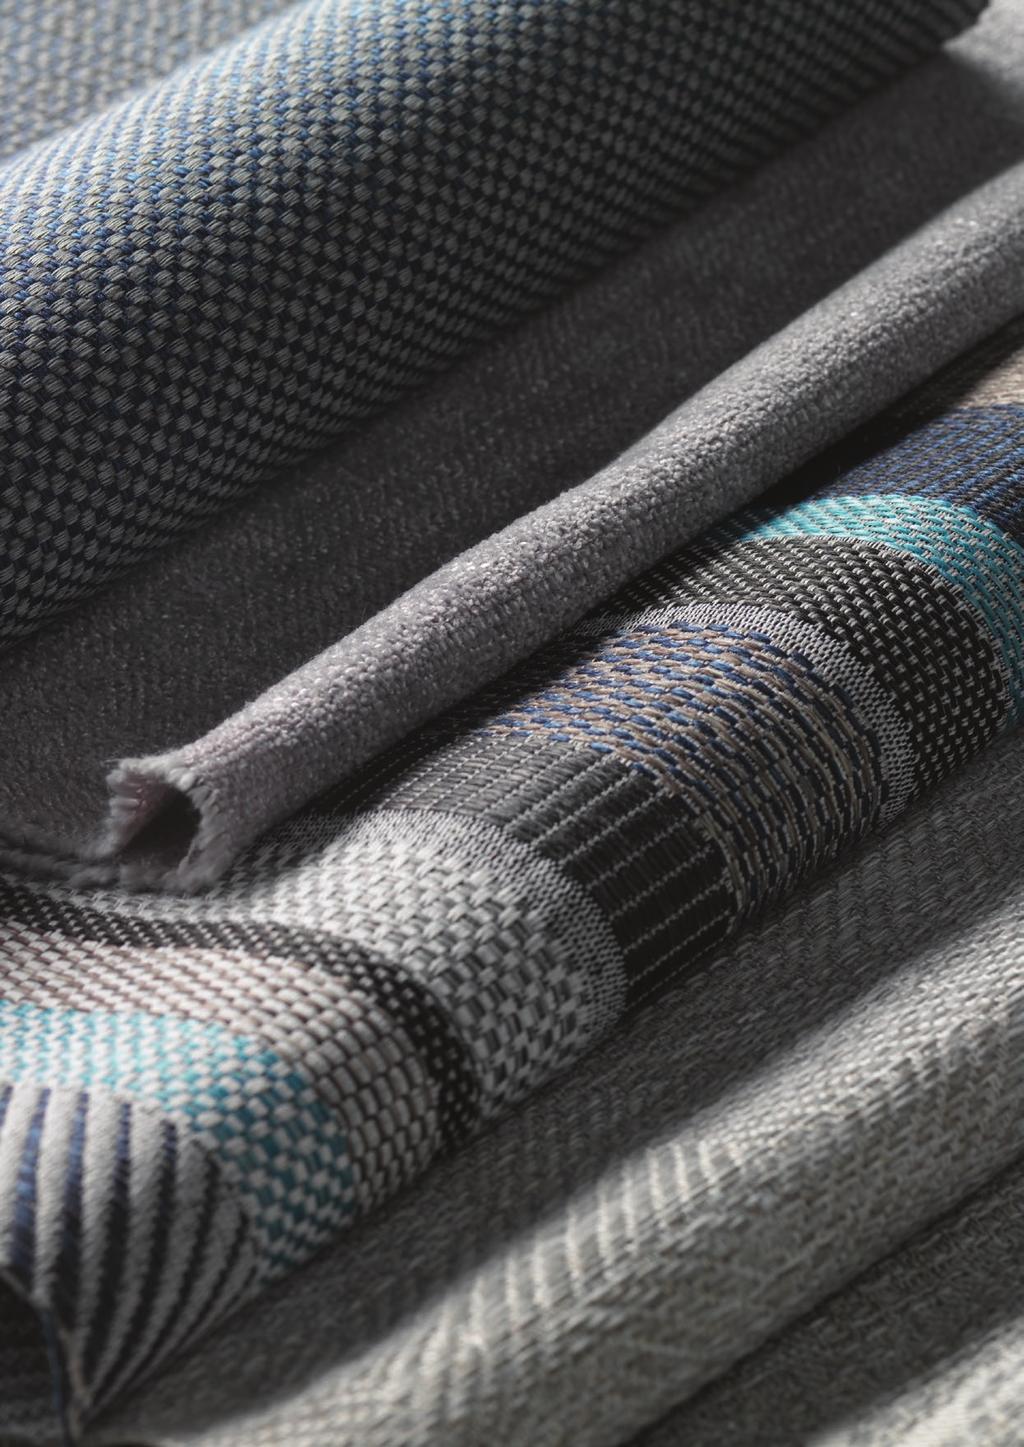 cover & colour Our cover & colour fabric collection is a carefully sourced and selected range of fabrics designed to